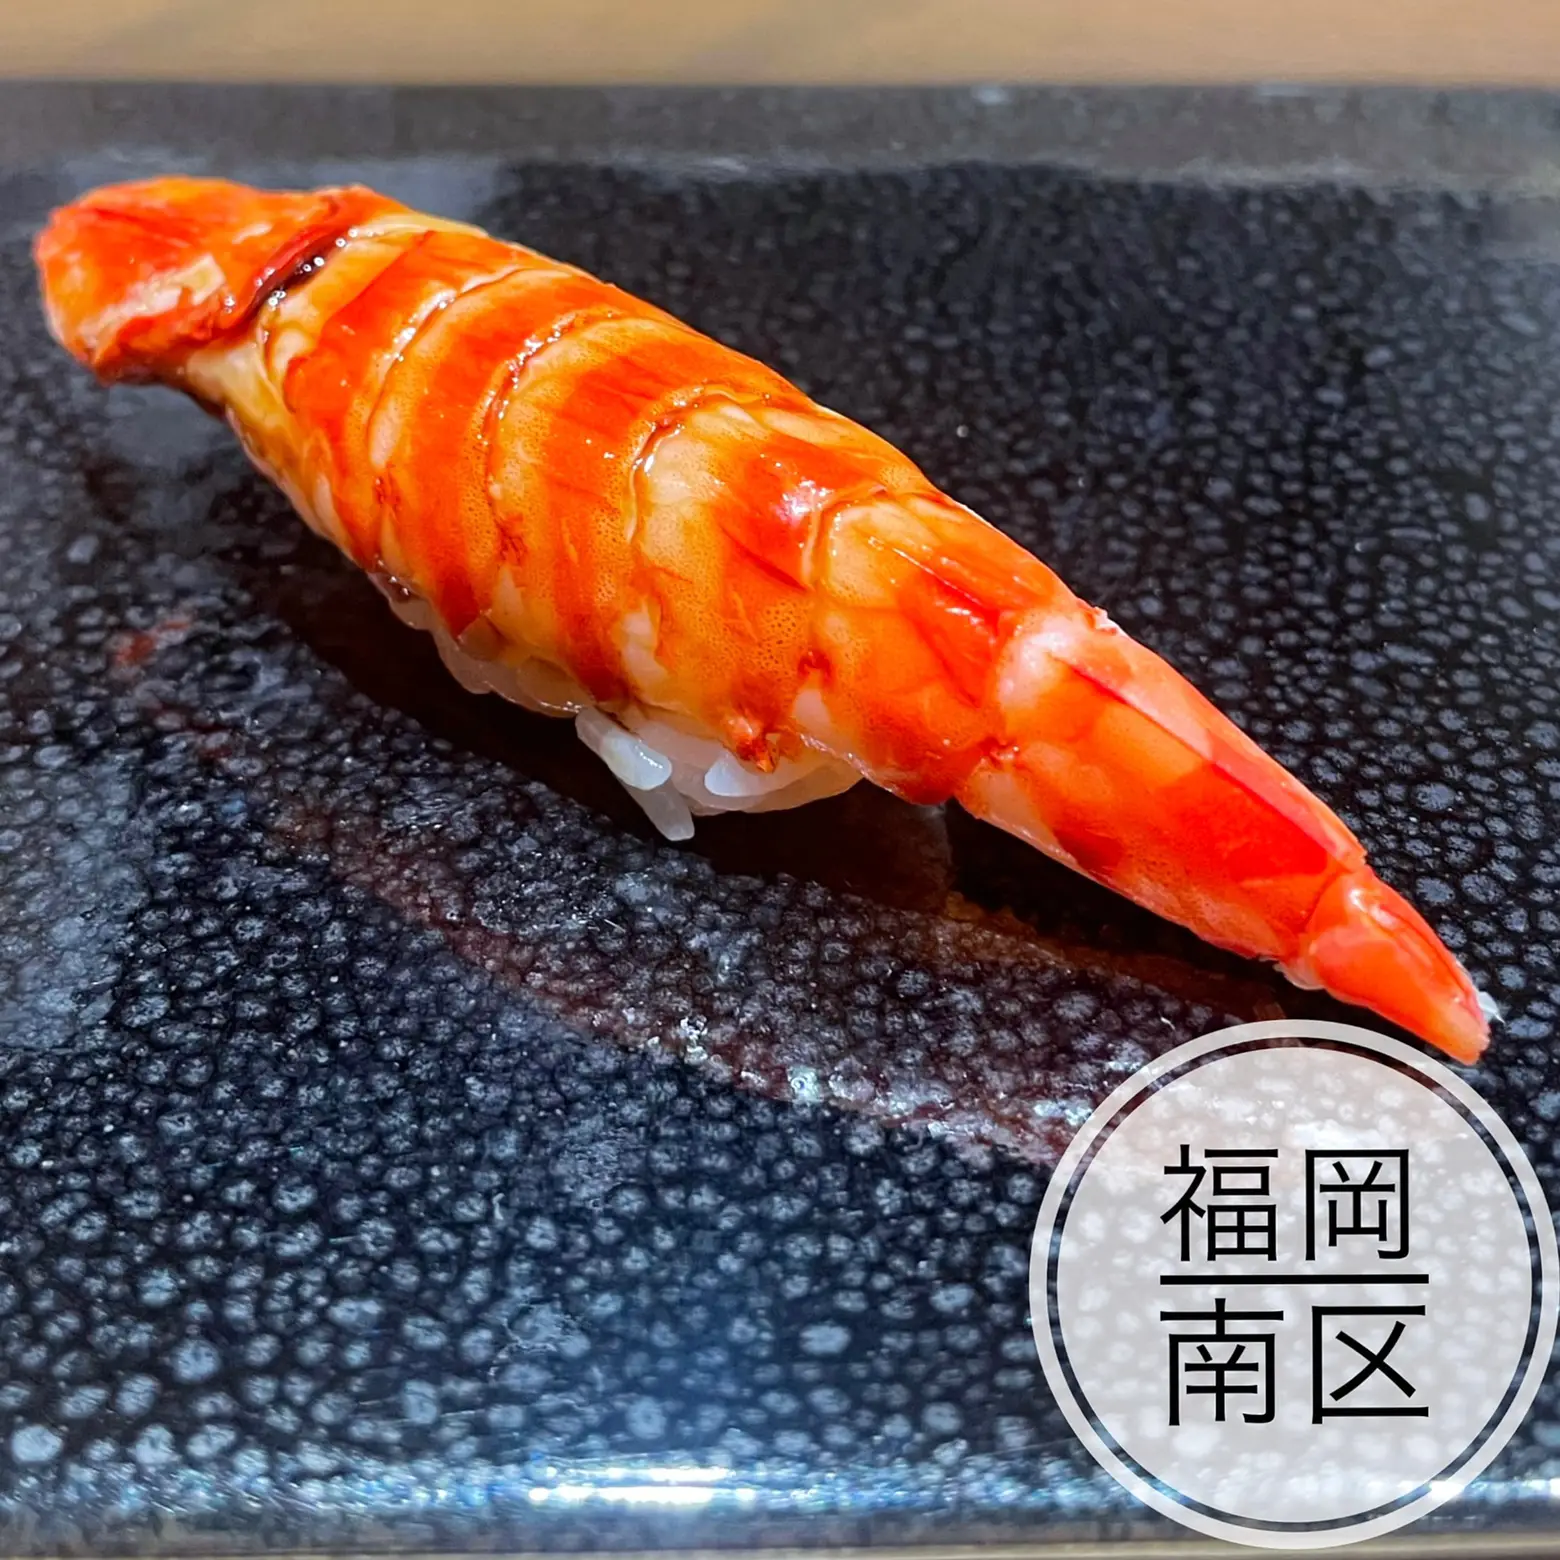 The menu is Omakase only! A long-established sushi restaurant with 